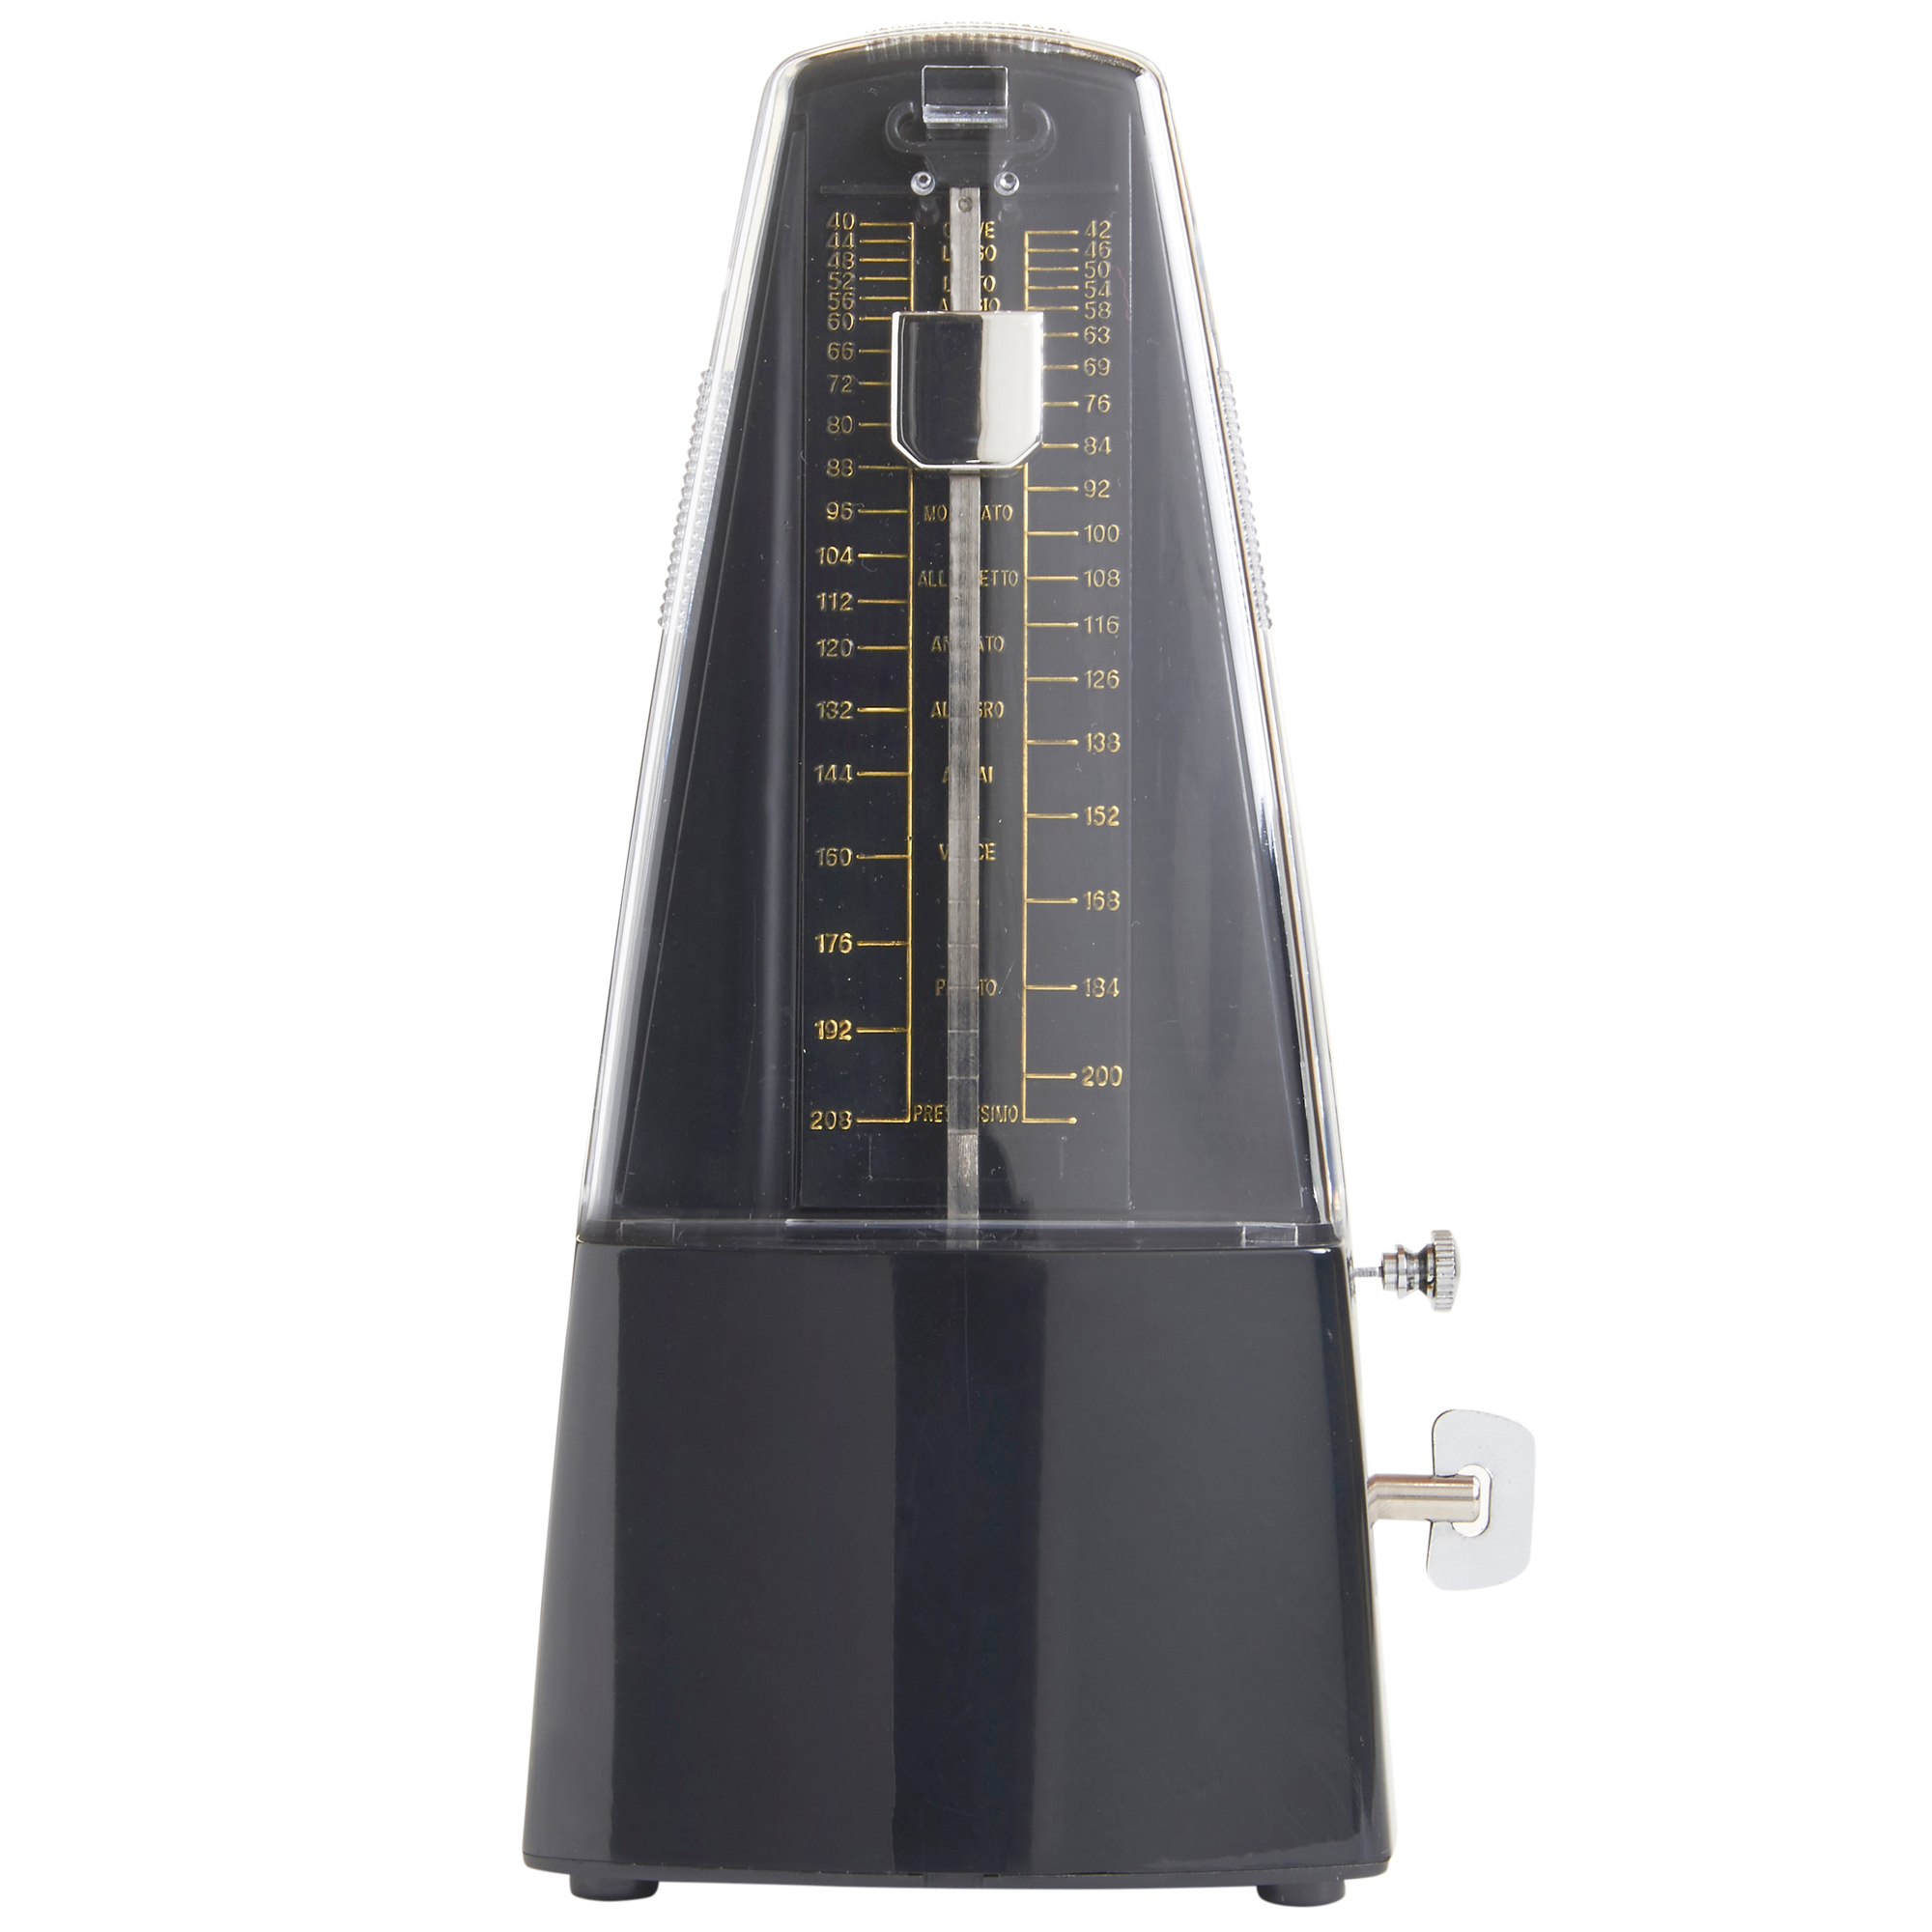 metronome for drummers